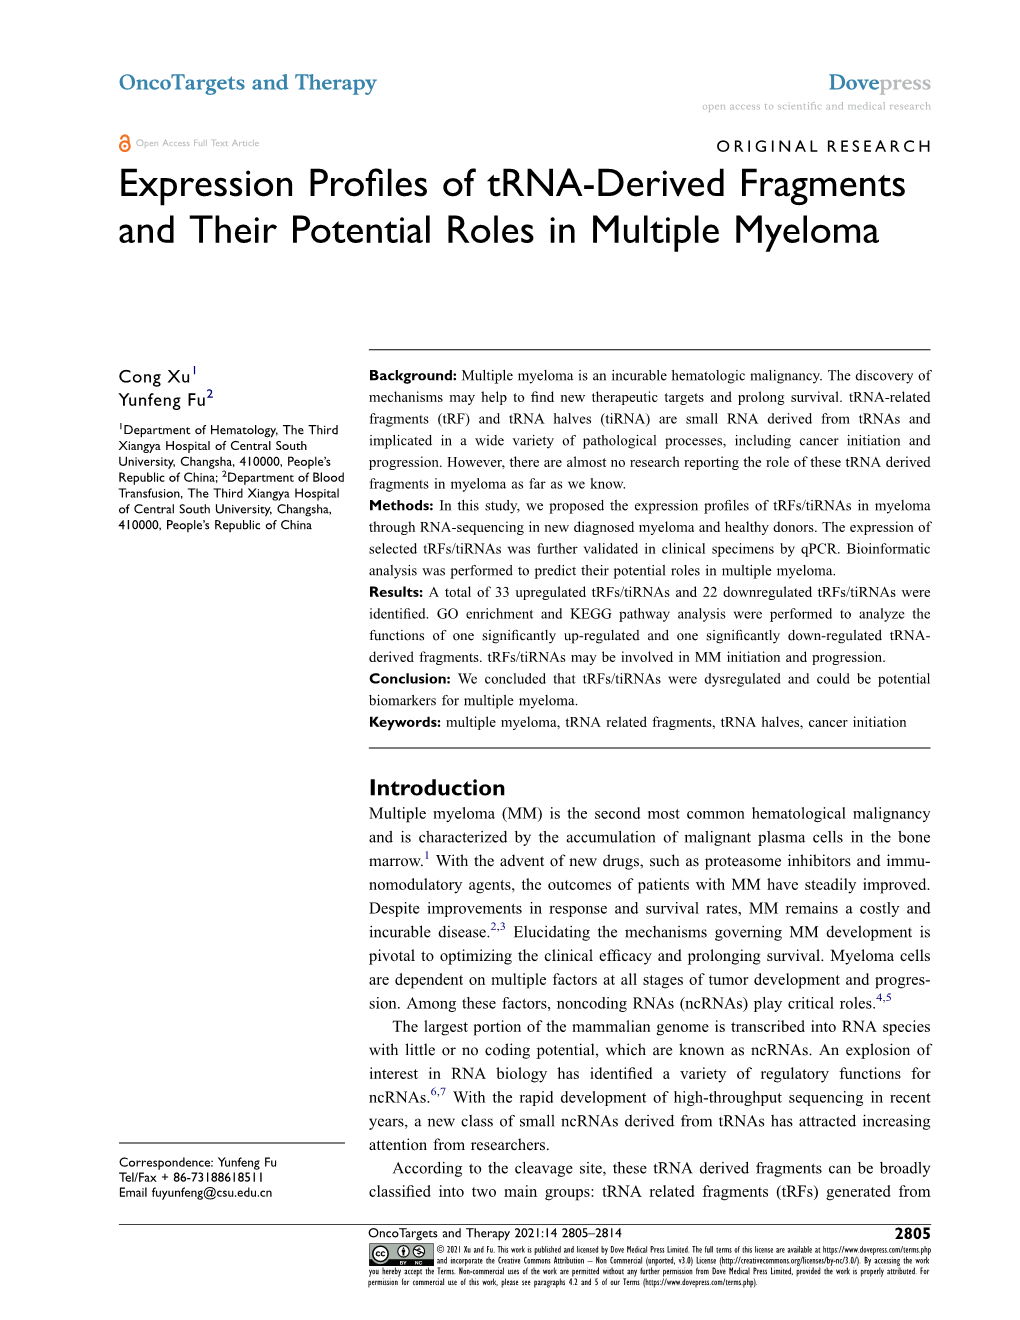 Expression Profiles of Trna-Derived Fragments and Their Potential Roles in Multiple Myeloma